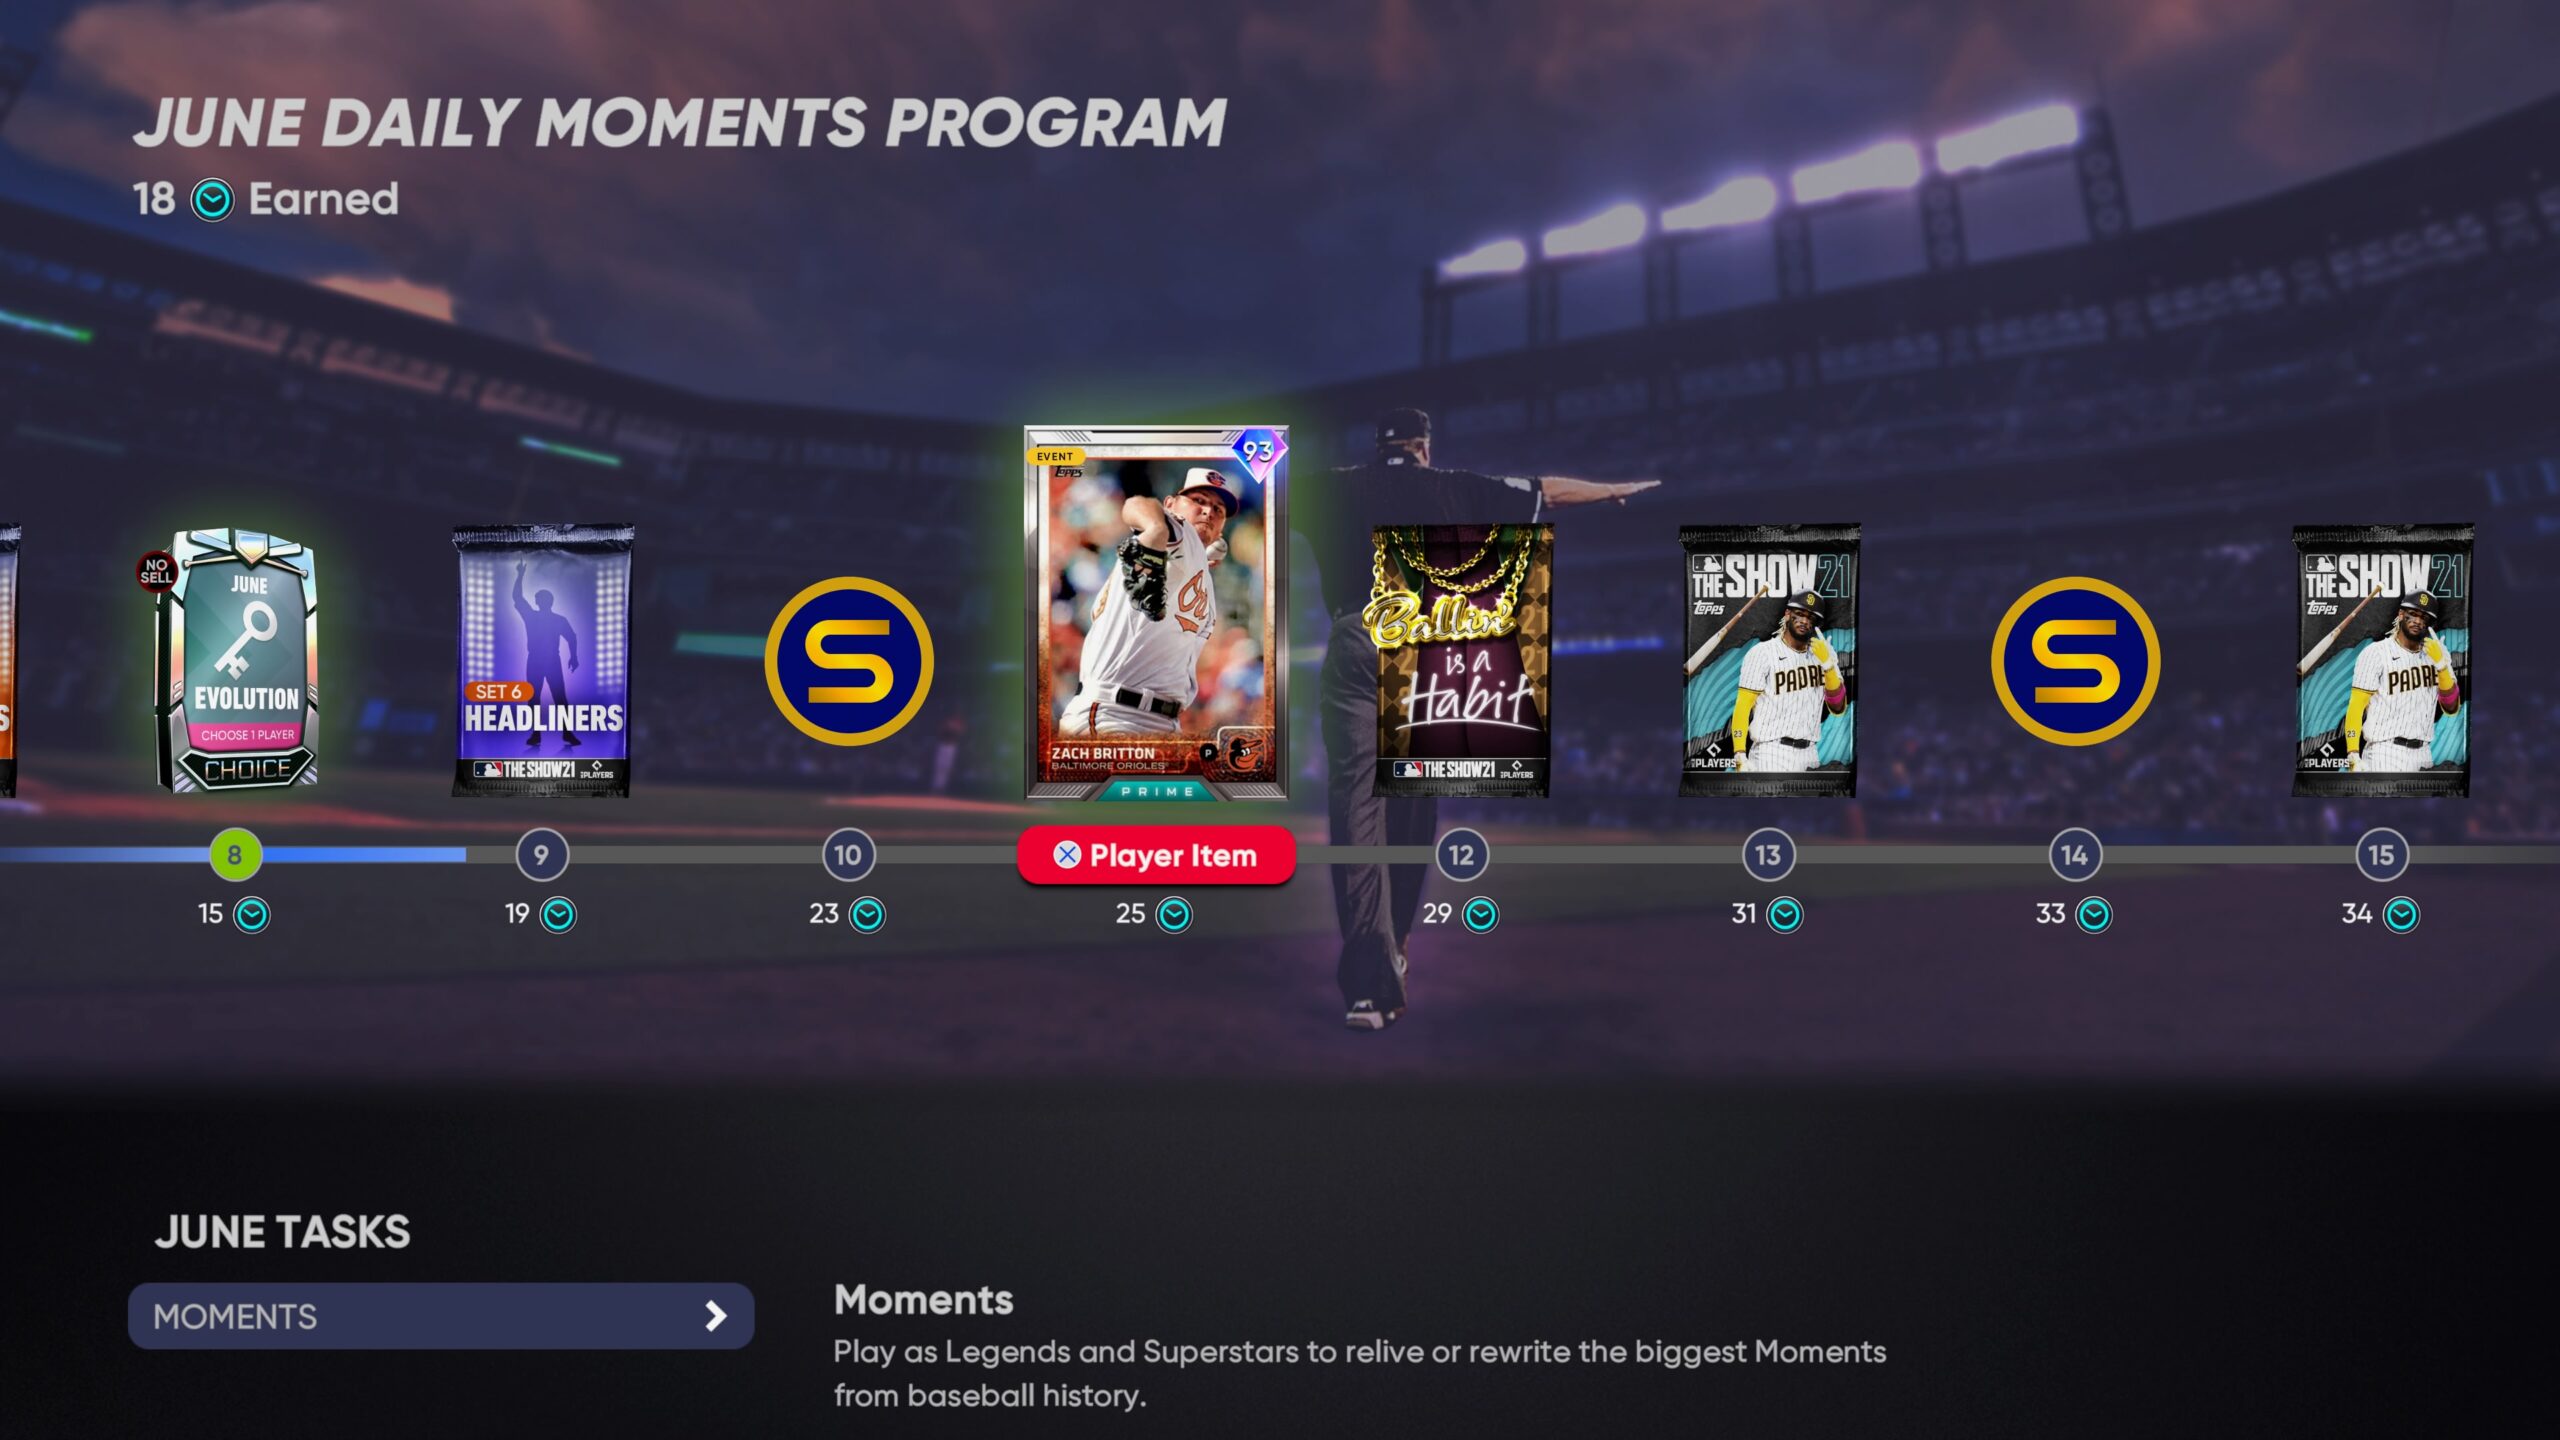 MLB The Show 23: How to complete Extreme Program and get 99 OVR